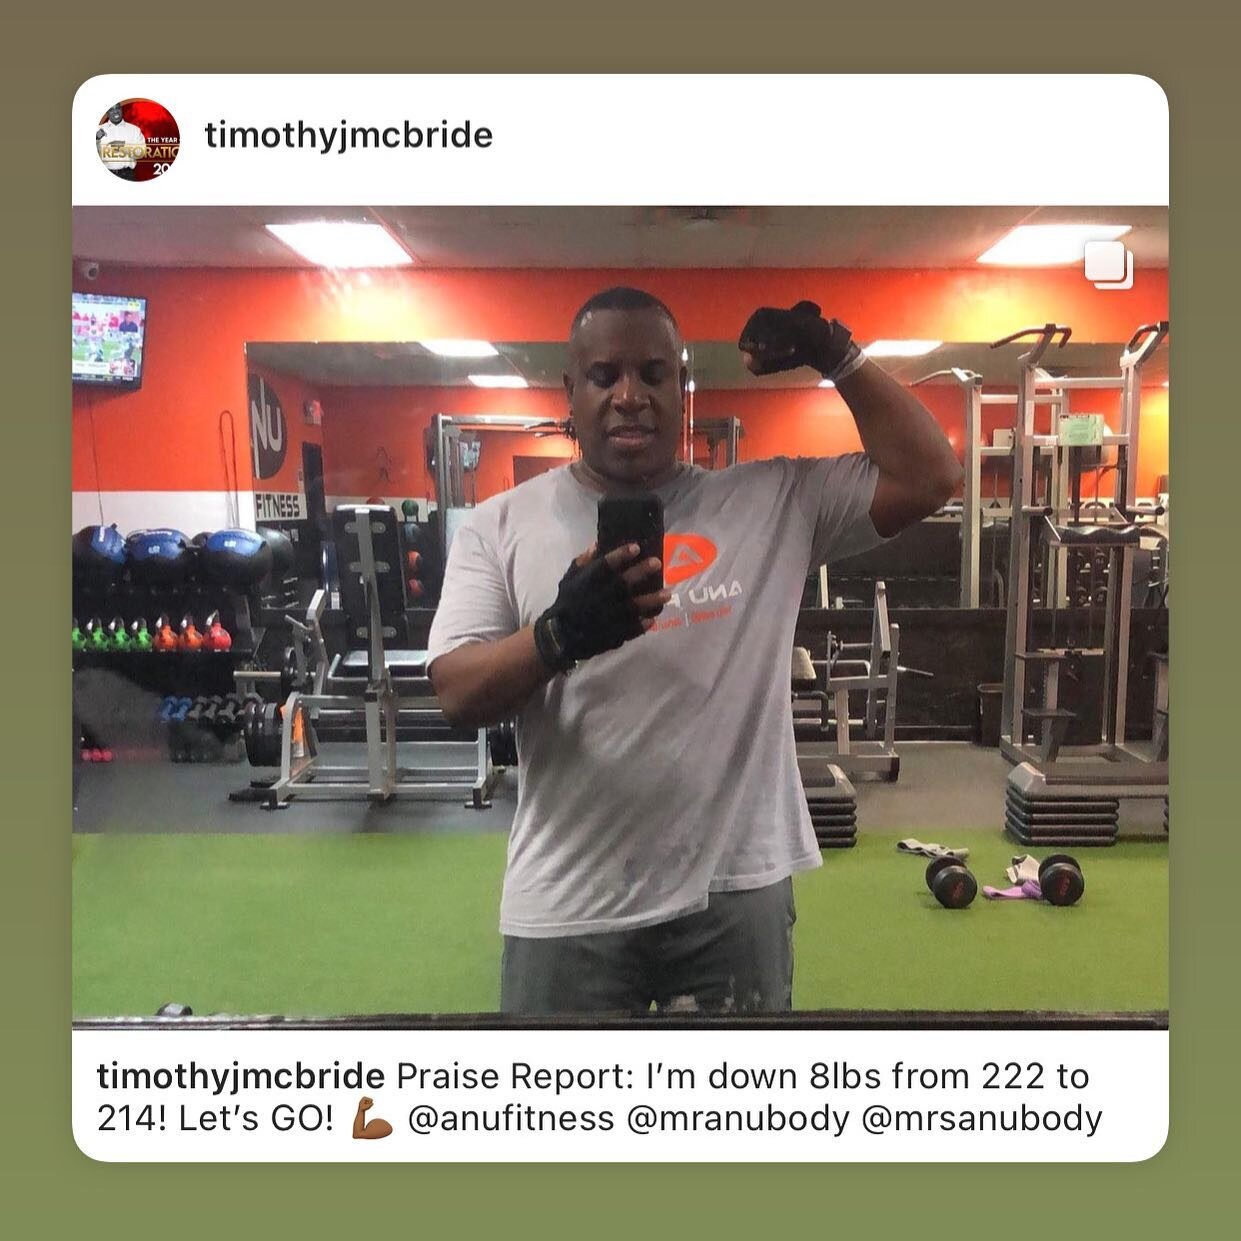 2 weeks in &amp; down 8 pounds! Congratulations to our client @timothyjmcbride for taking control over his health! He has consistently been working towards his fitness goals over the last two weeks. Consistency gets results!  Keep up the great work, 